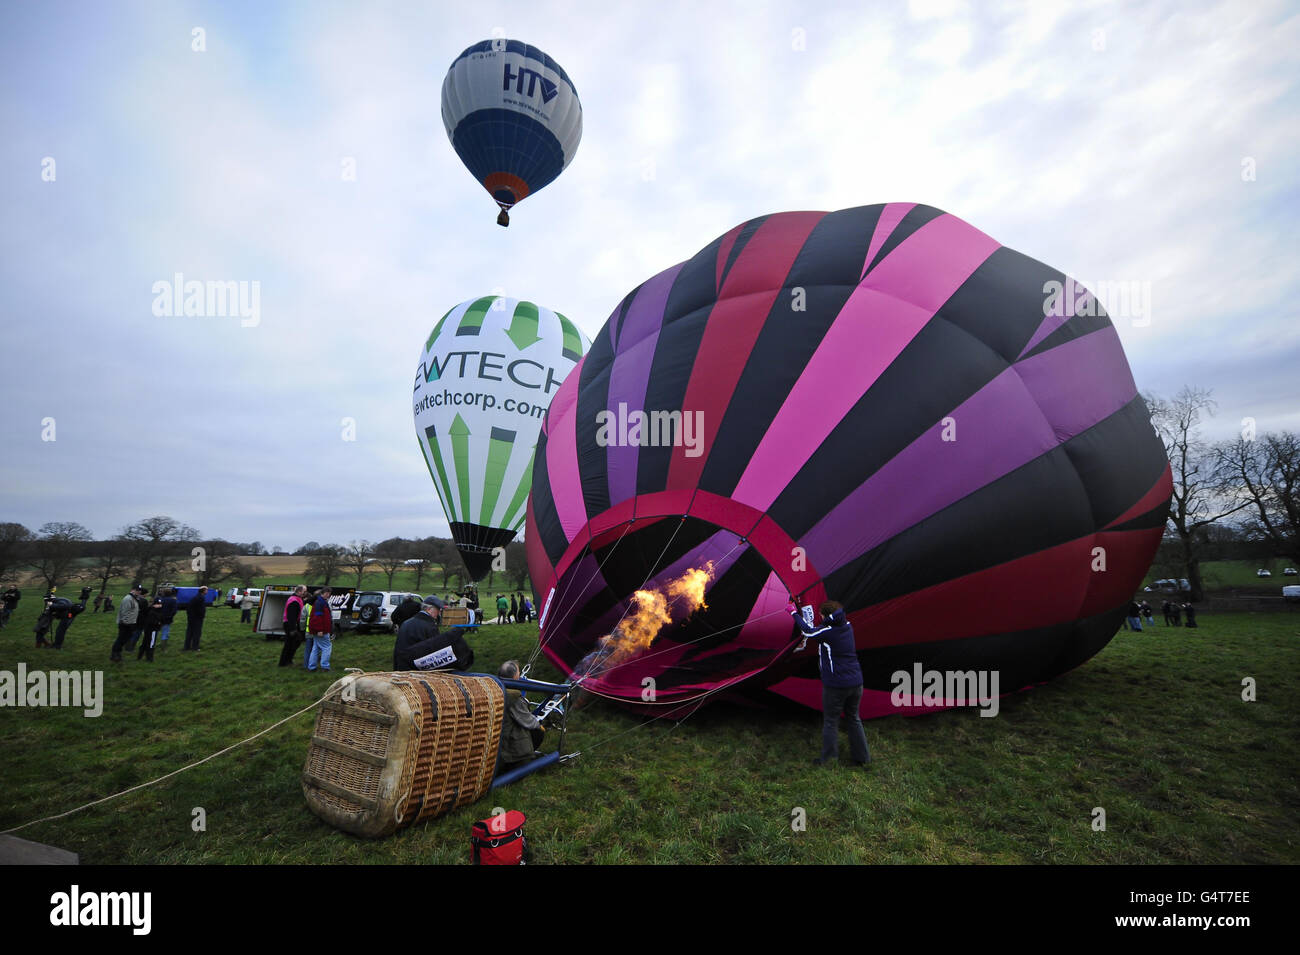 Photo. Crews inflate their hot air balloon using a propane burner as they prepare for flight at the 40th Annual International Icicle Balloon Meet, taking place on the first full weekend in January and attended by pilots and balloon crews from all over the world, gathering in a field near Savernake Forrest, near Marlborough, to take flight across the Wiltshire countryside. Stock Photo